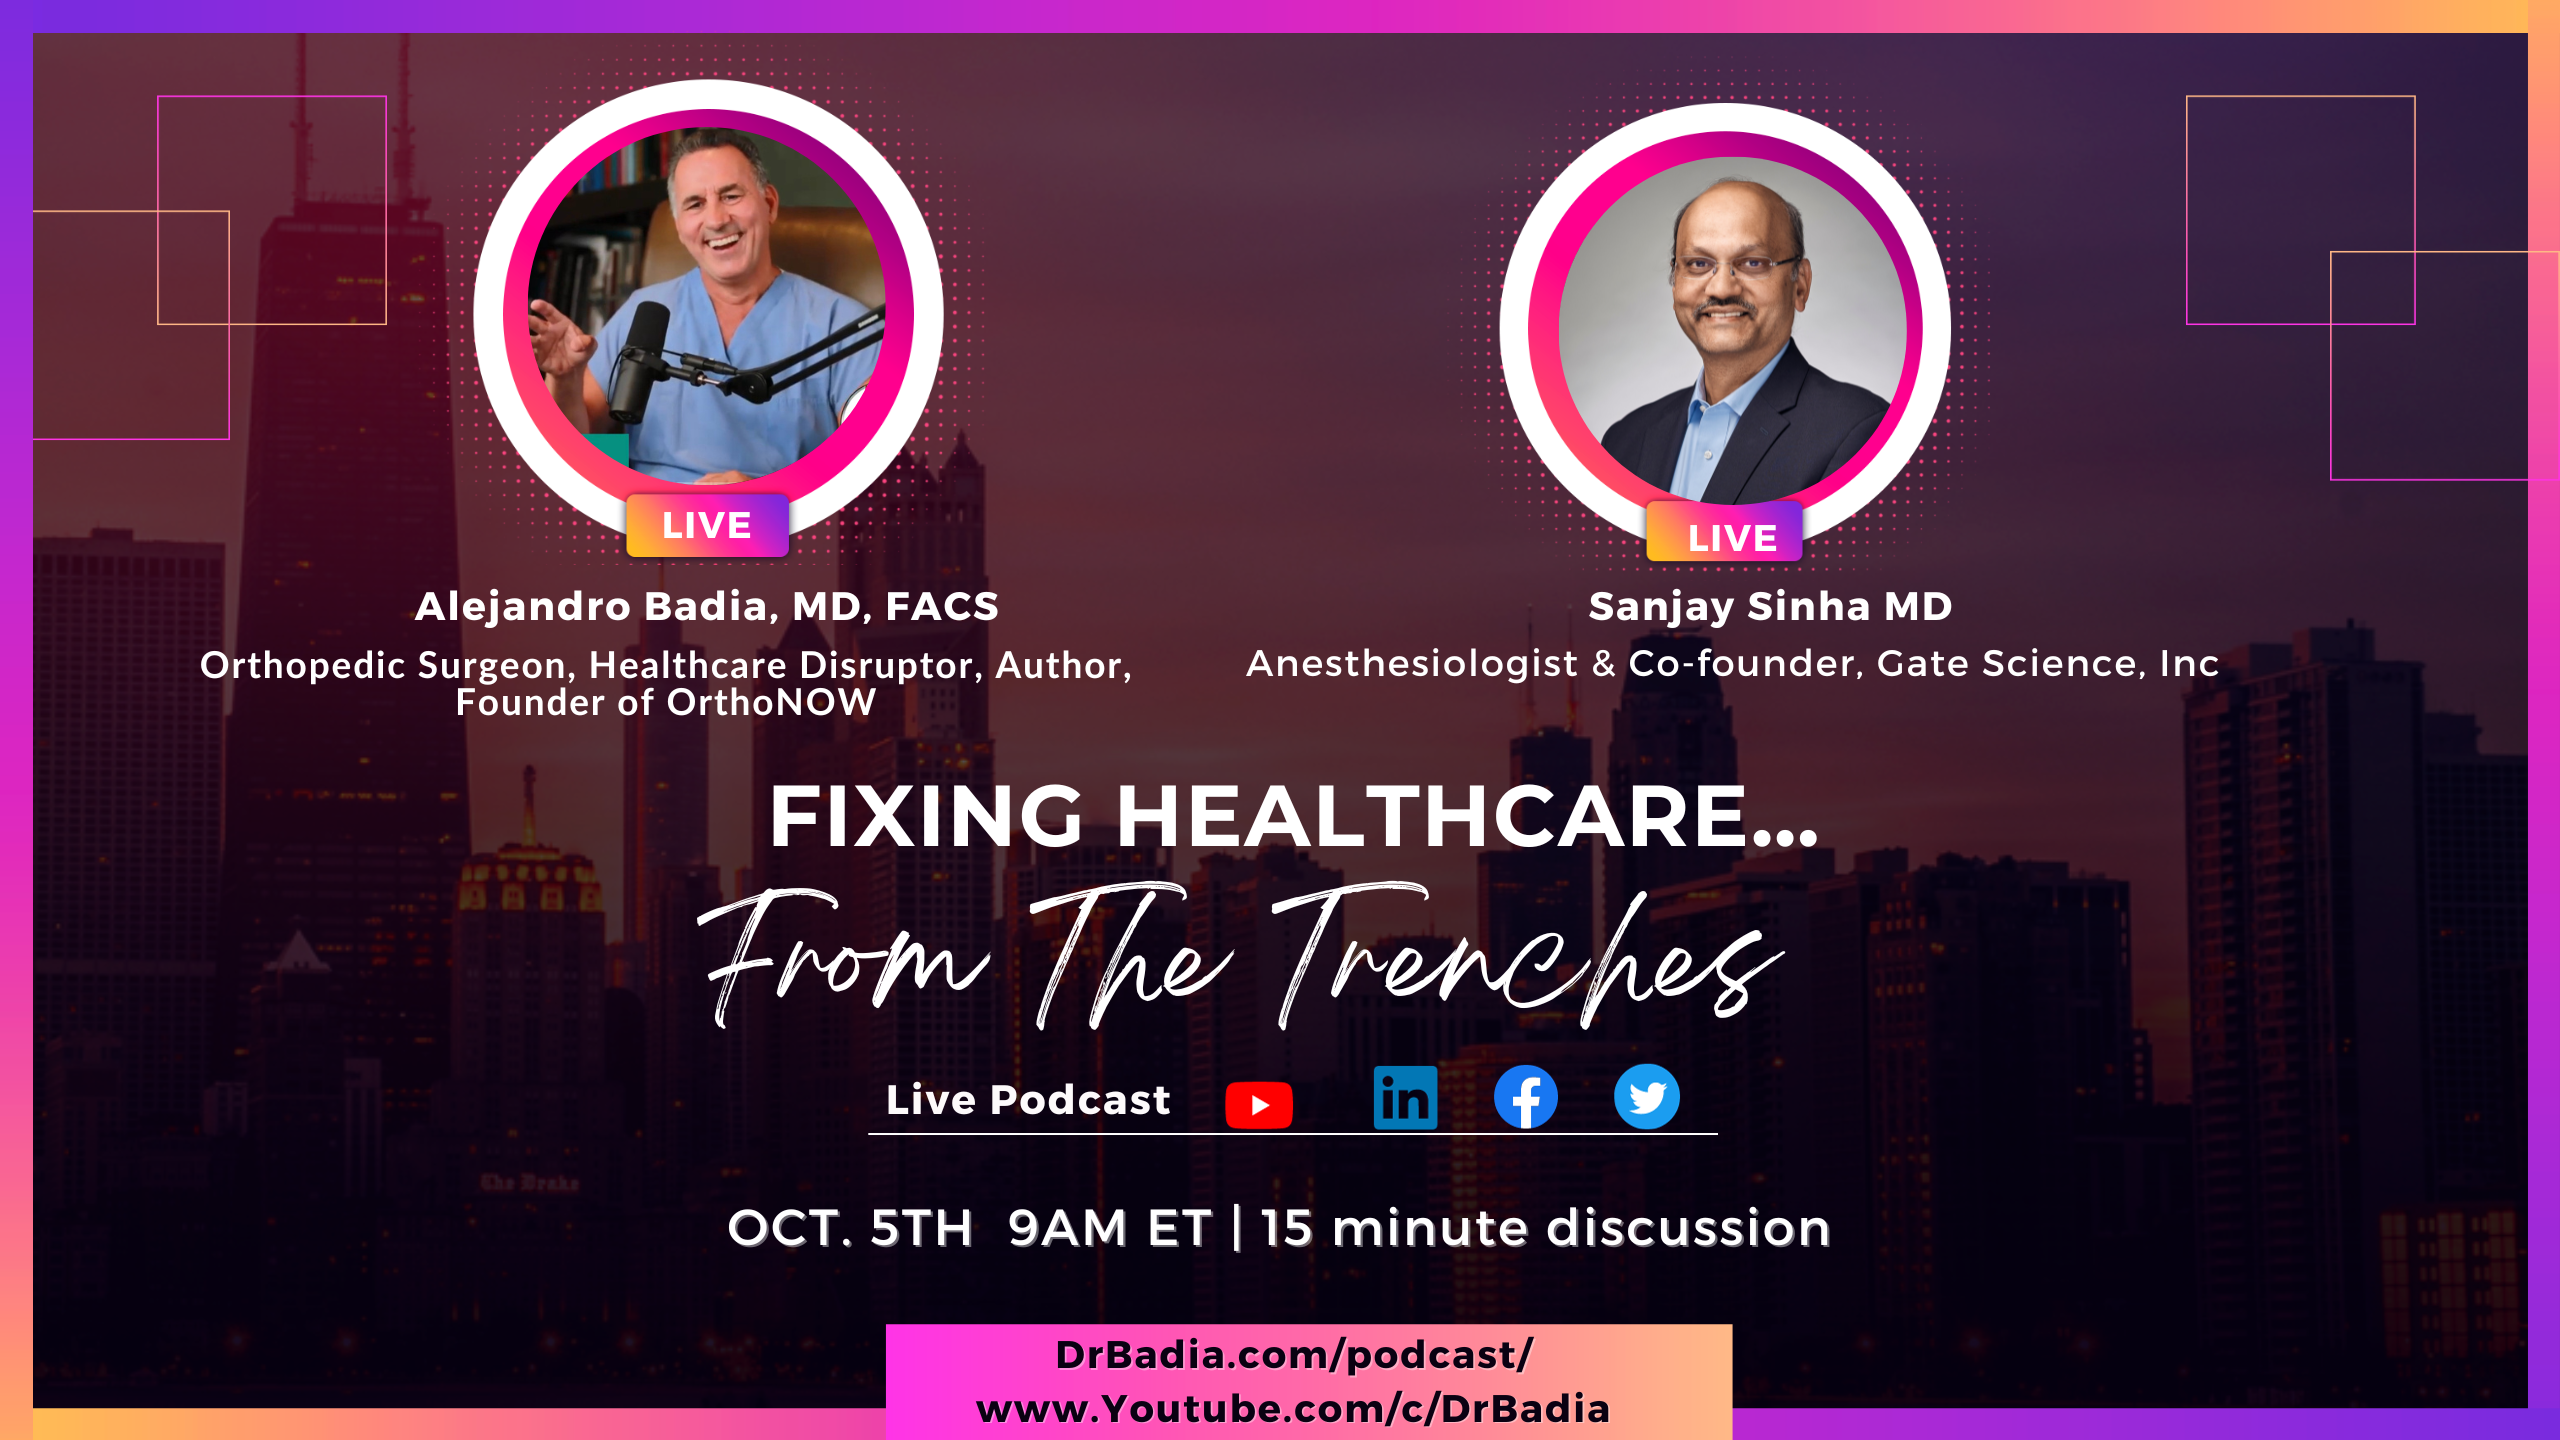 E21 Dr. Sinha on "Fixing Healthcare...From The Trenches" with Dr. Badia